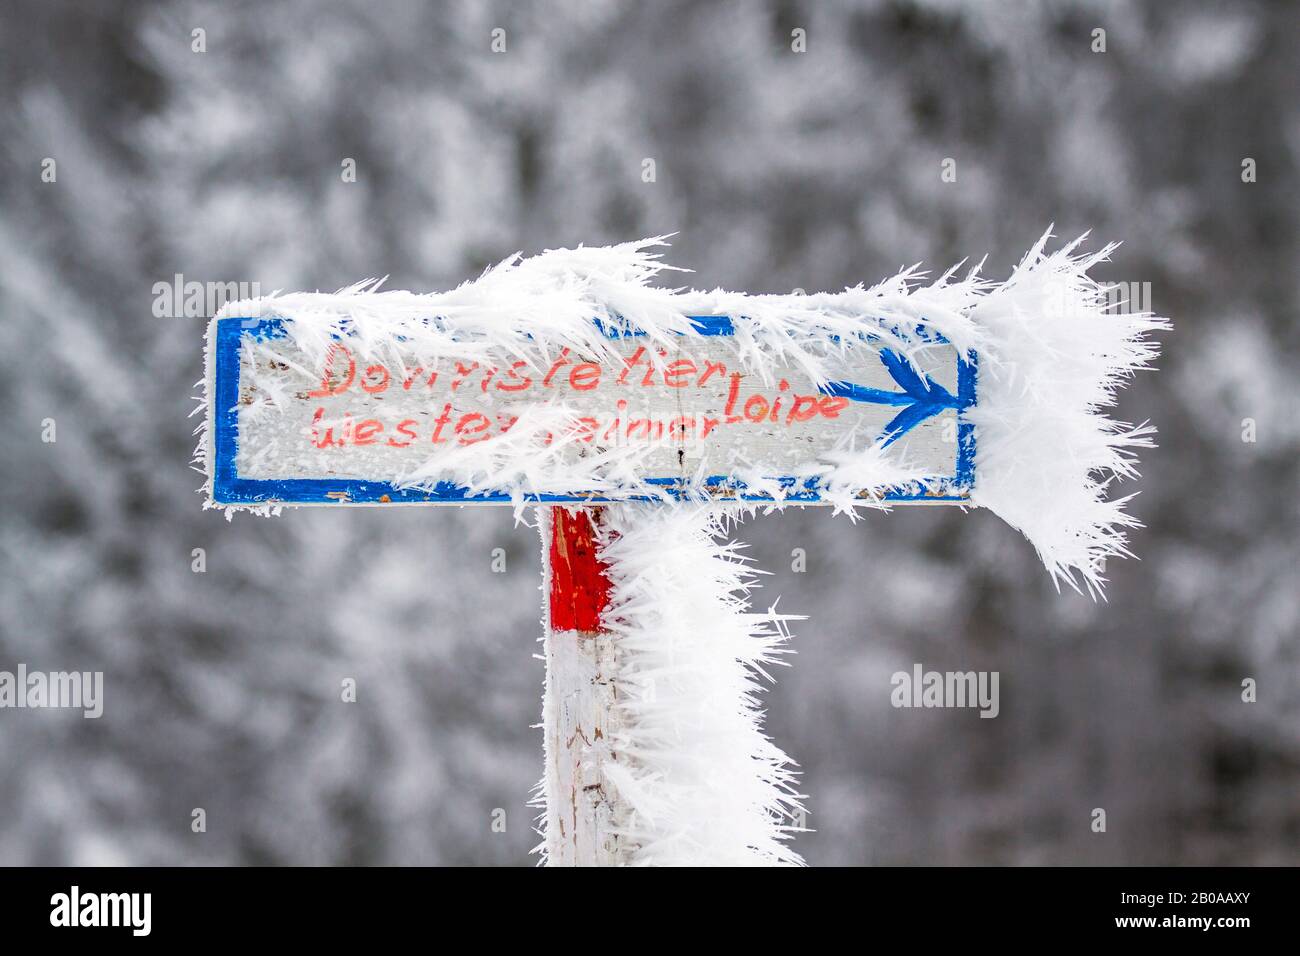 hoar frost on a direction sign, Germany Stock Photo